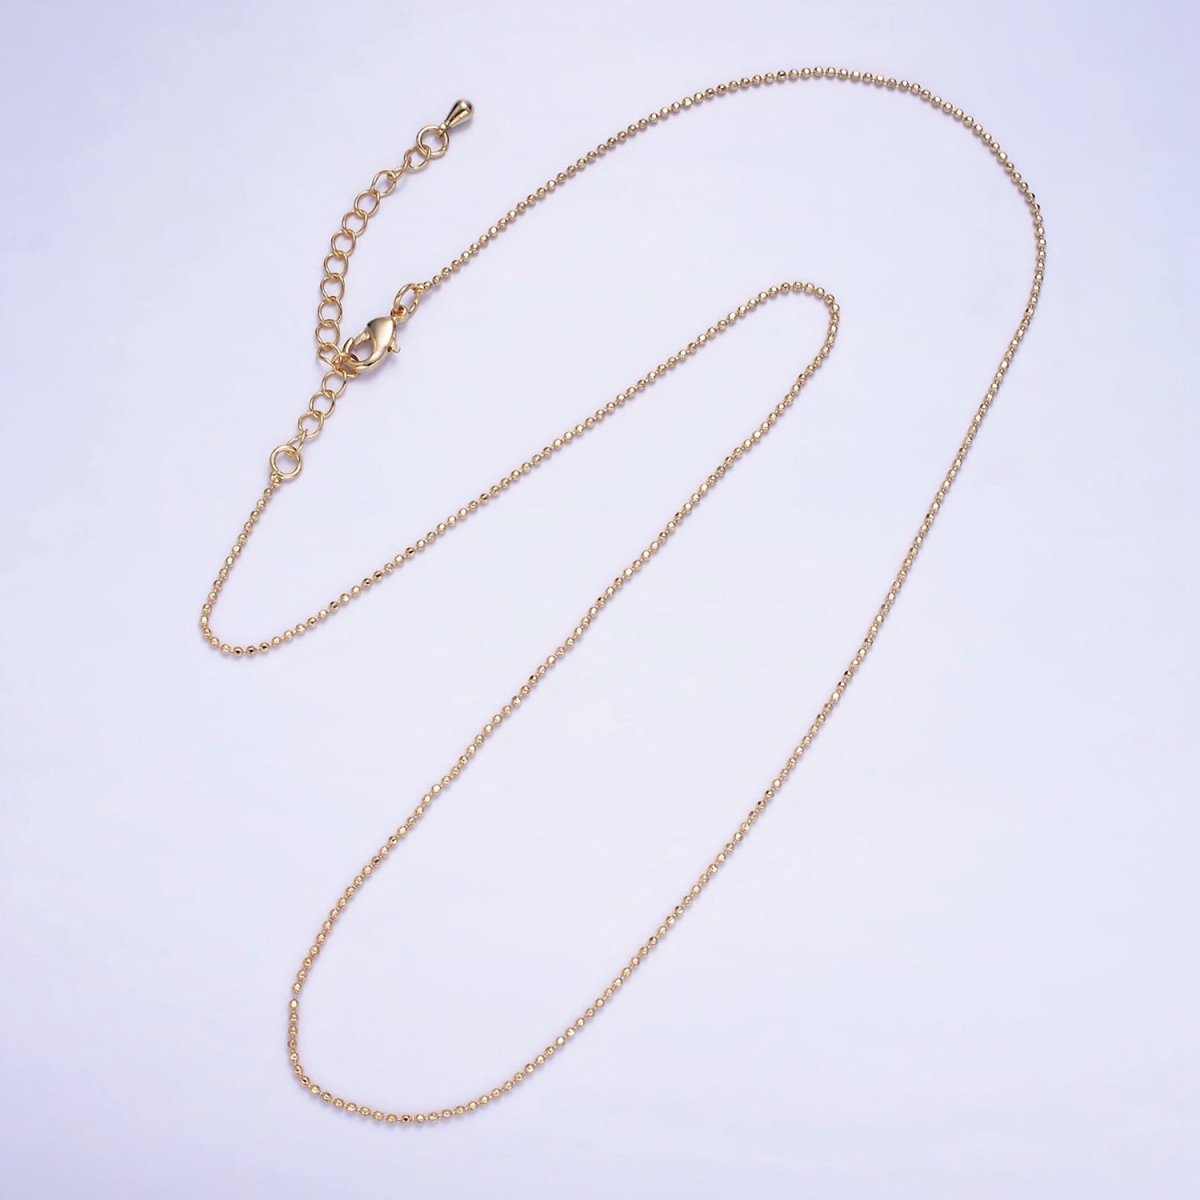 14K Gold Filled 1mm Bead Ball Chain 17.5 Inch, 19.5 Inch Necklace w. Extender | WA-2428 WA-2429 - DLUXCA